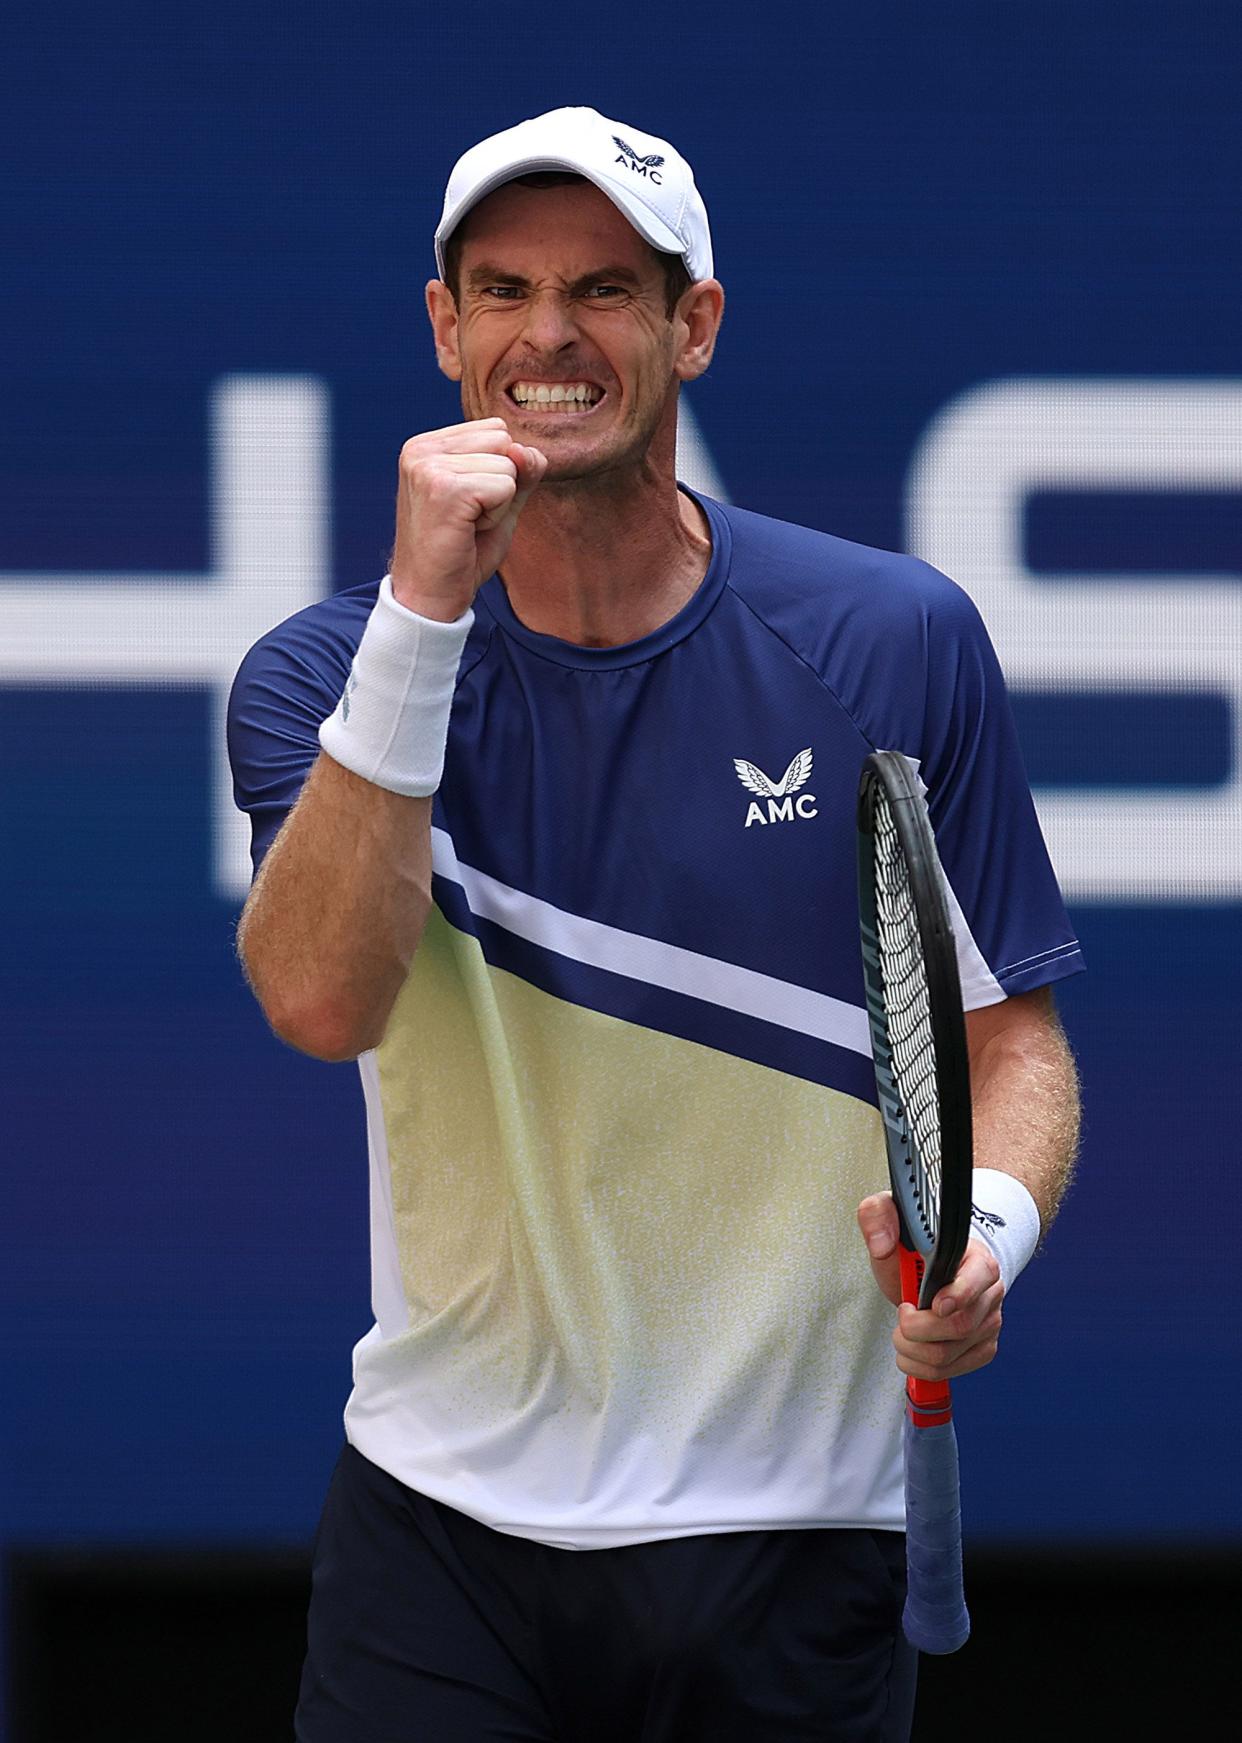 Andy Murray of Great Britain celebrates a point against Emilio Nava of the United States in their Men's Singles Second Round match on Day Three of the 2022 U.S. Open at USTA Billie Jean King National Tennis Center on Aug. 31, 2022, in Flushing, Queens.